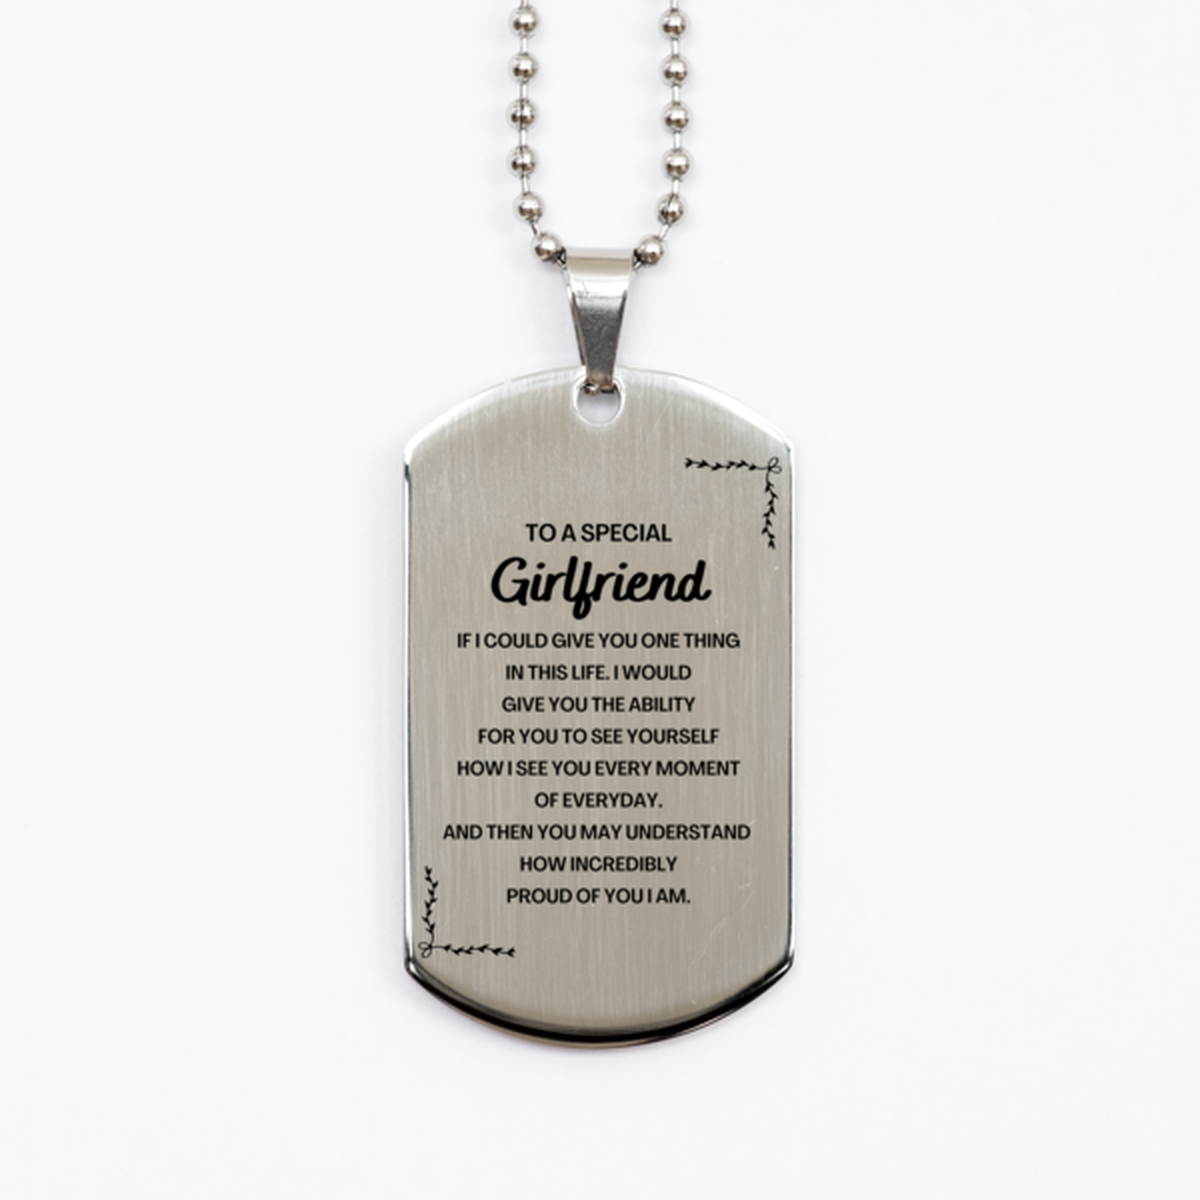 To My Girlfriend Silver Dog Tag, Gifts For Girlfriend Engraved, Inspirational Gifts for Christmas Birthday, Epic Gifts for Girlfriend To A Special Girlfriend how incredibly proud of you I am